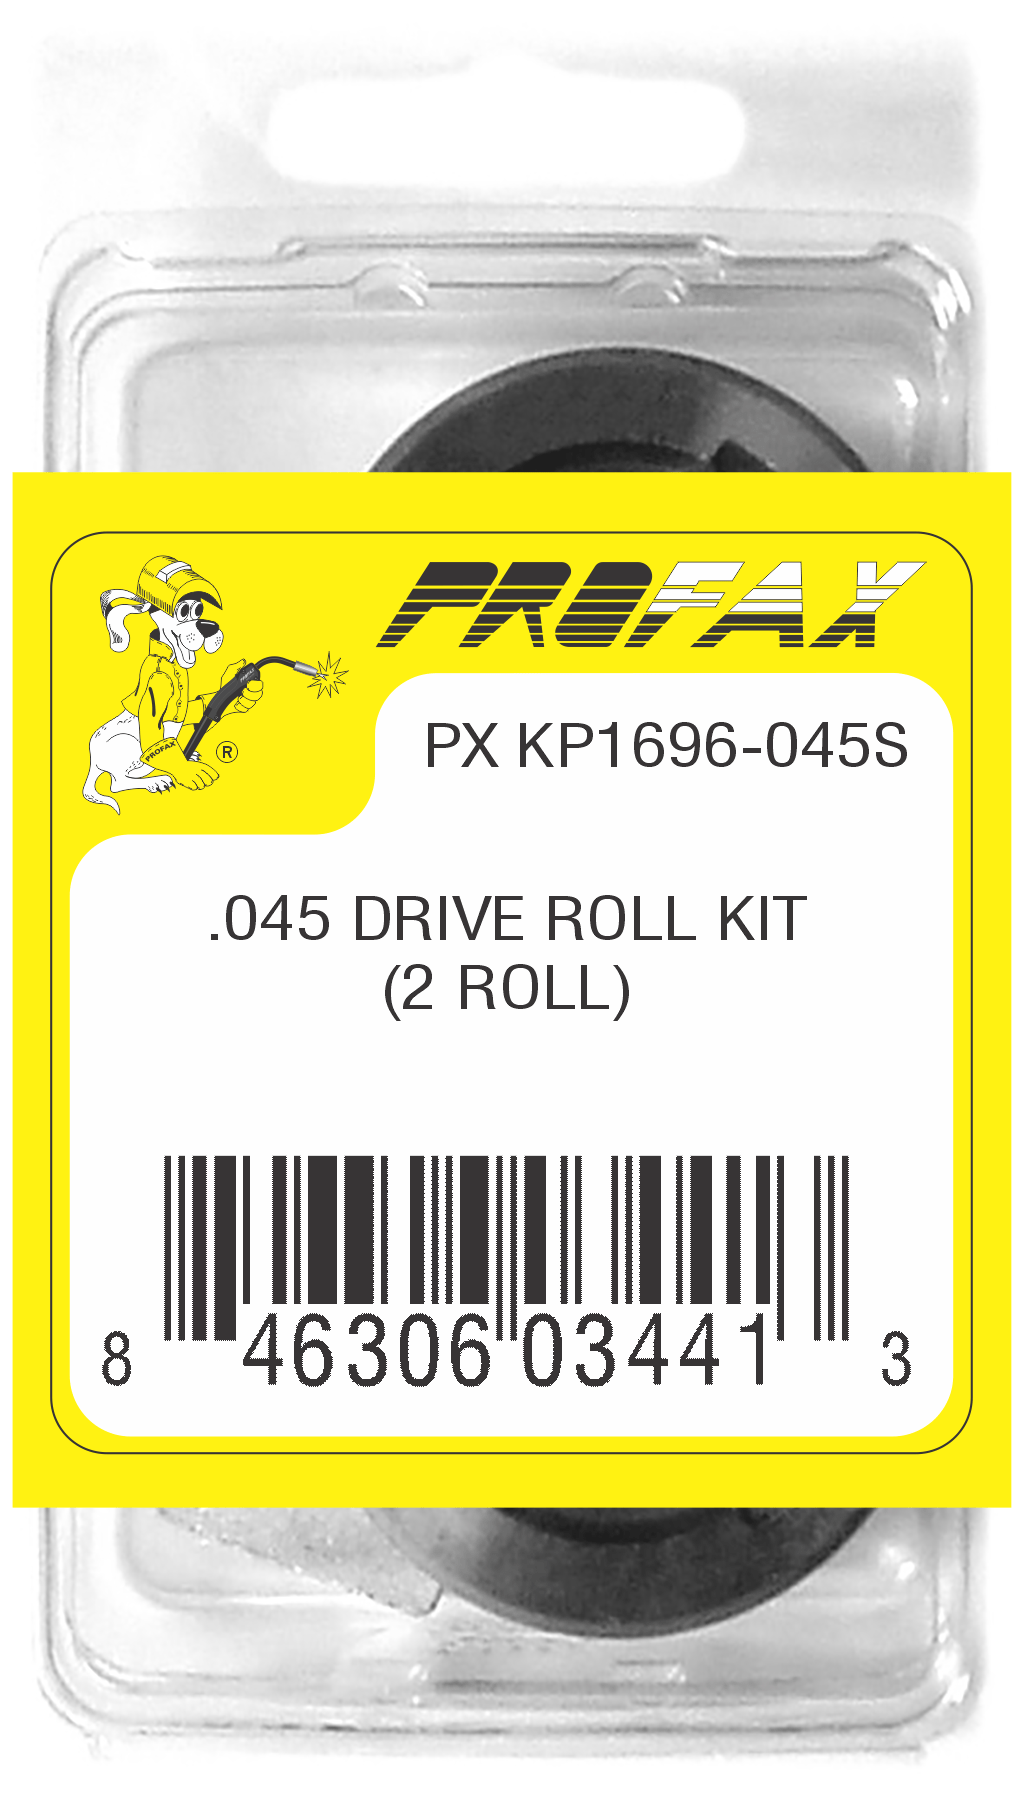 Profax Consumables Lincoln Drive Roll Kit .040-.045 Solid 2 Roll (KP1696-045S)